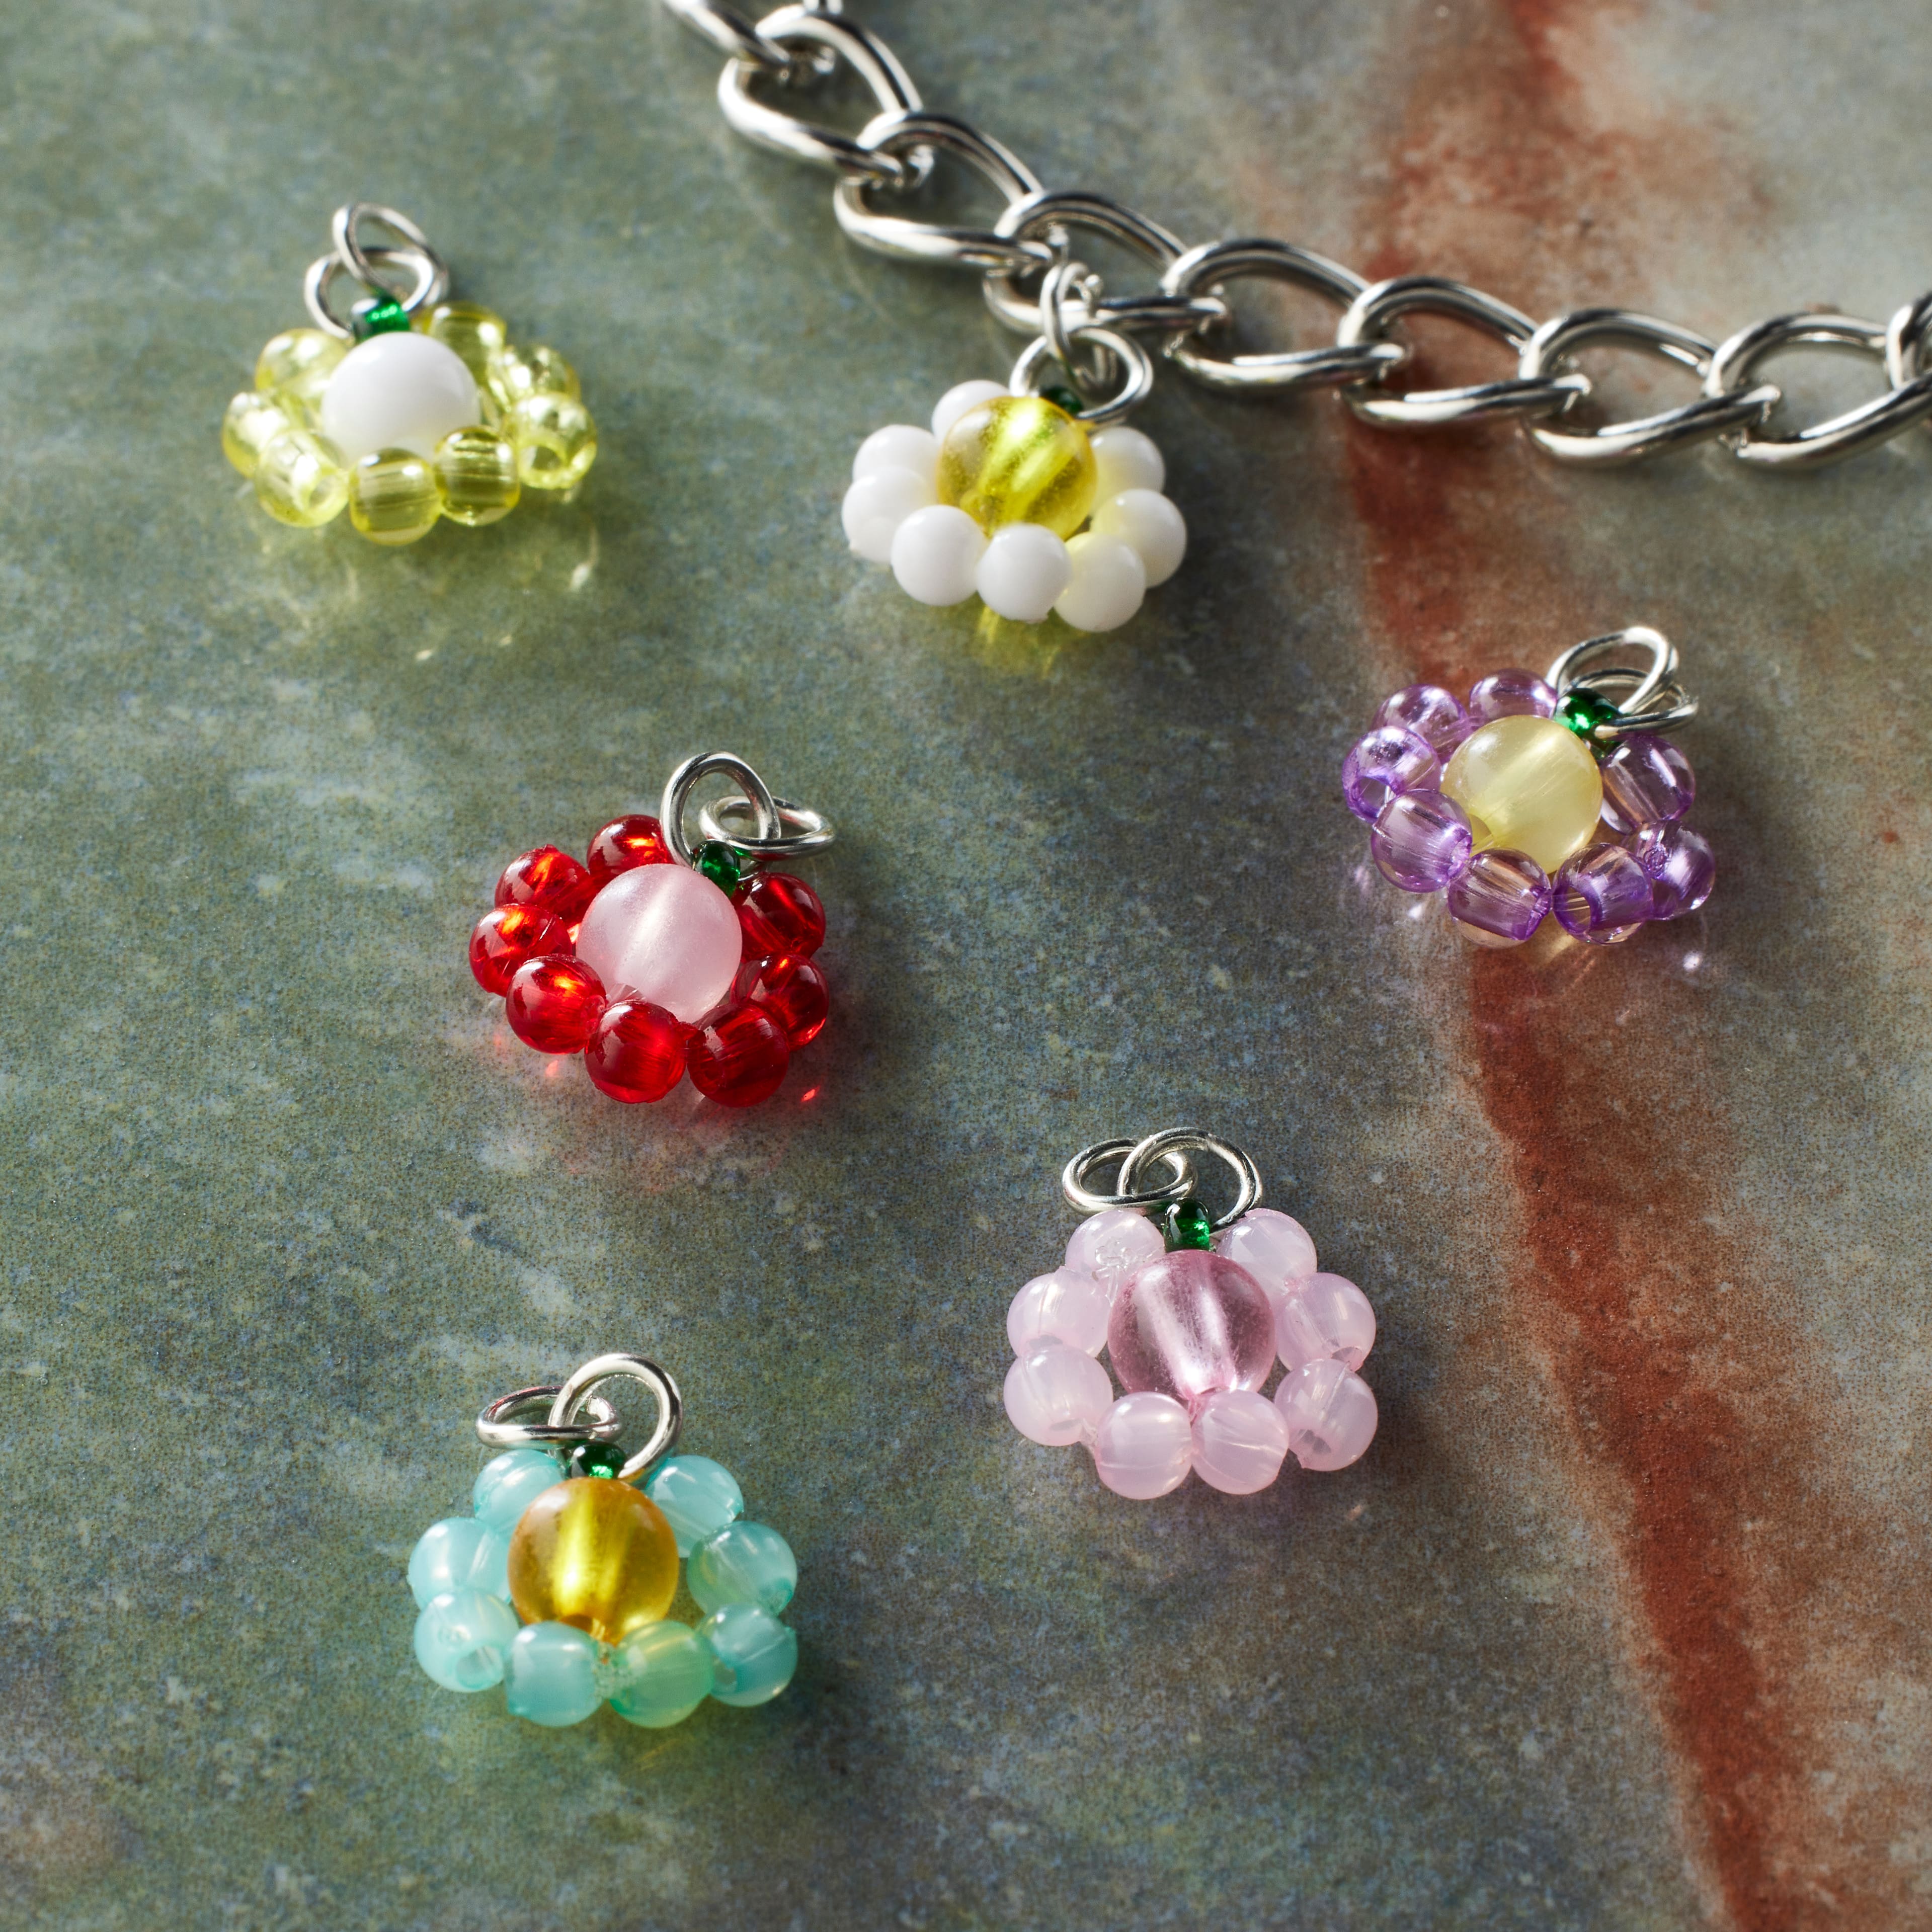 Seed Bead Flower Charms by Bead Landing&#x2122;